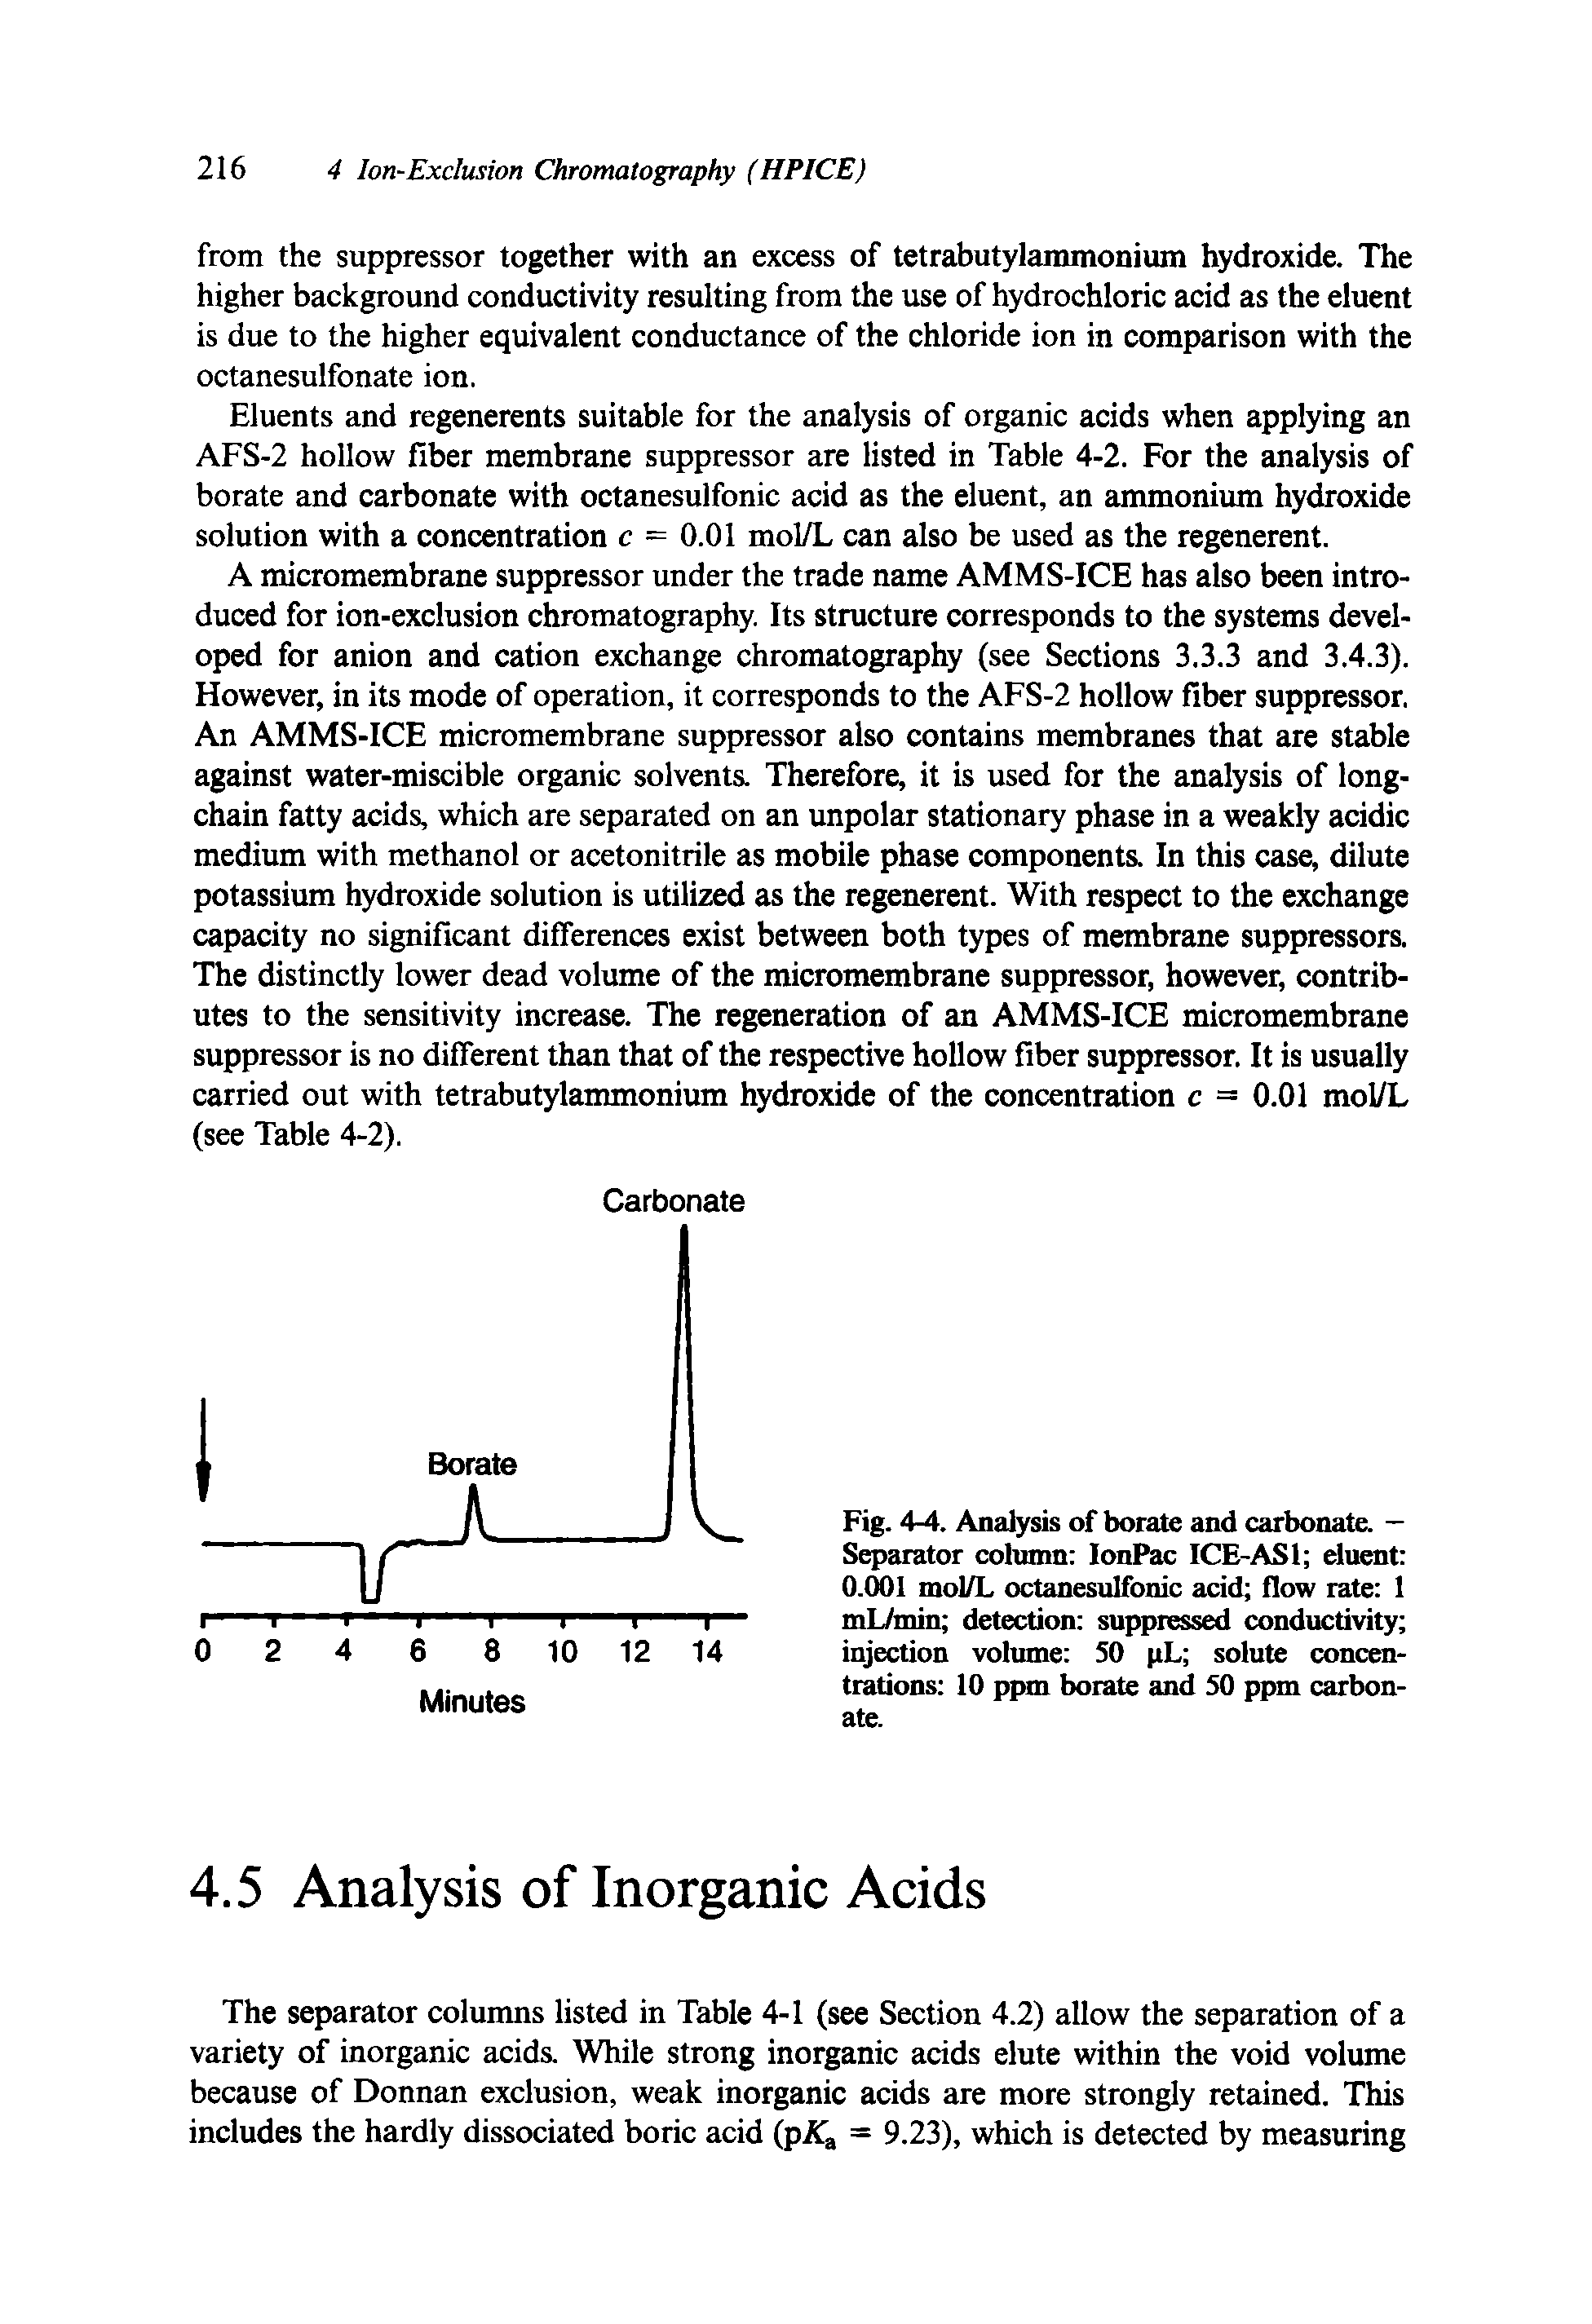 Fig. 4-4. Analysis of borate and carbonate. — Separator column IonPac ICE-AS1 eluent 0.001 mol/L octanesulfonic acid flow rate 1 mL/min detection suppressed conductivity injection volume SO pL solute concentrations 10 ppm borate and 50 ppm carbonate.